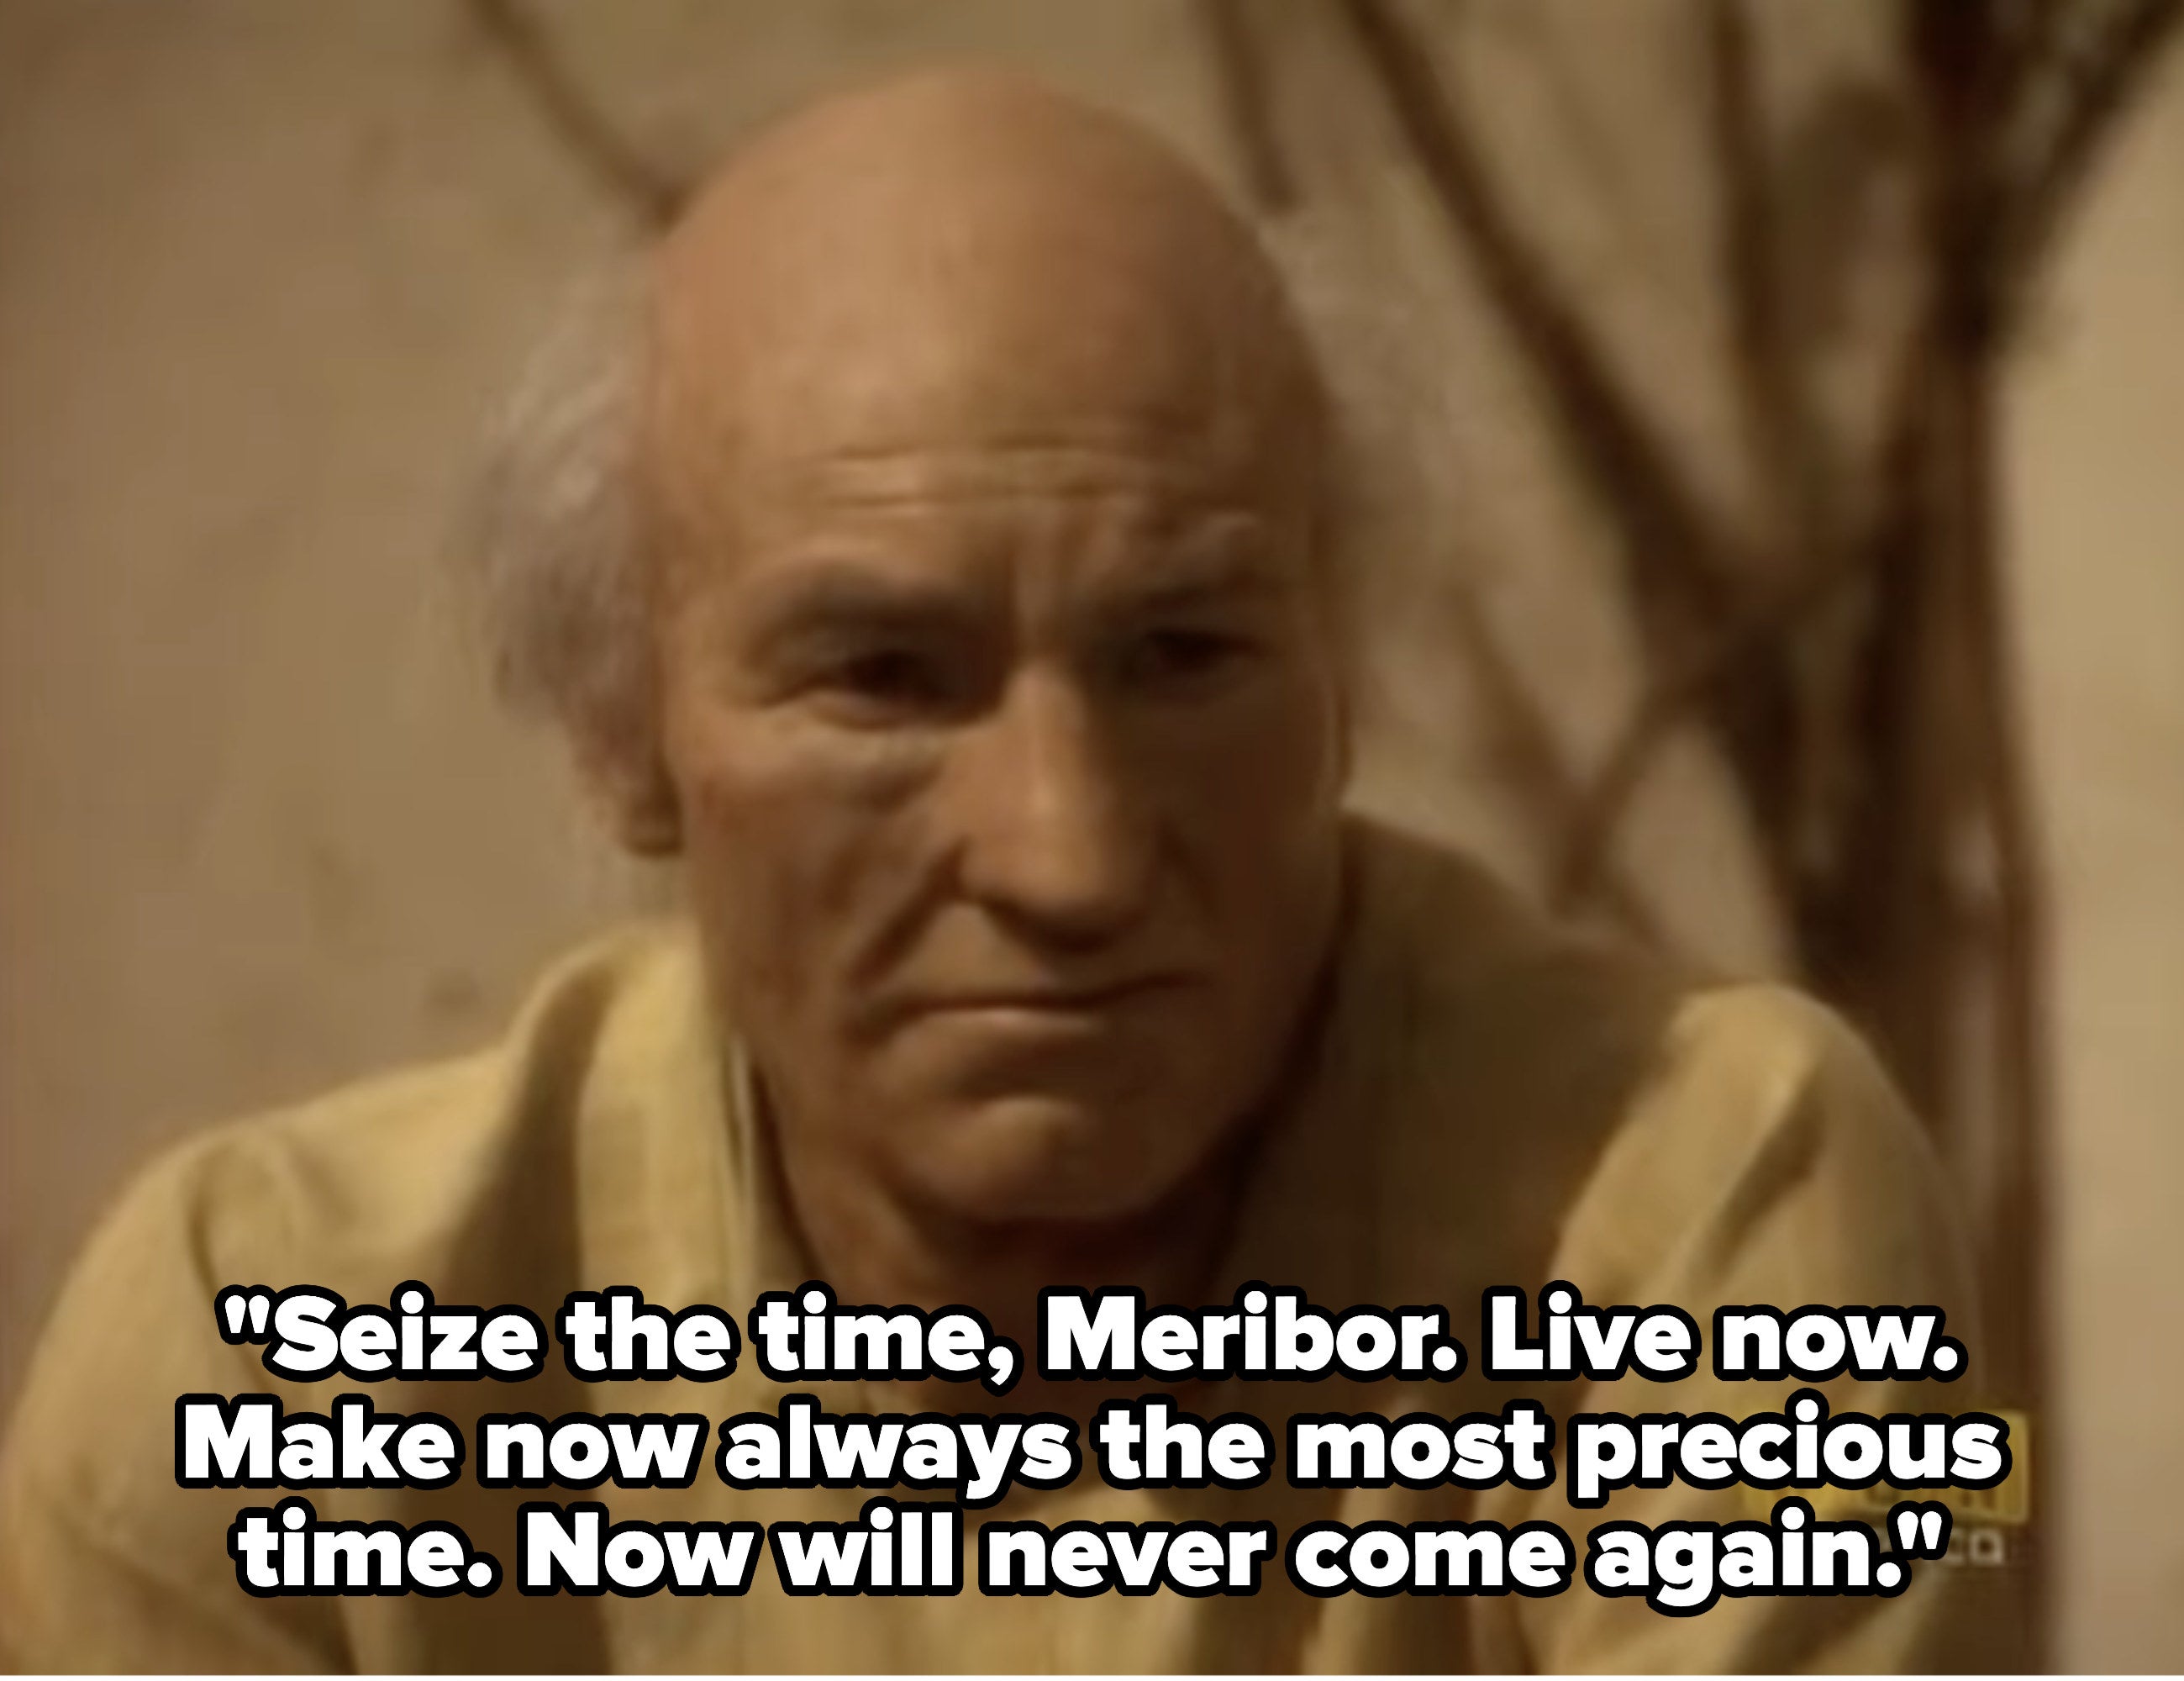 Man saying &quot;Seize the time, Meribor; live now; make now always the most precious time&quot;